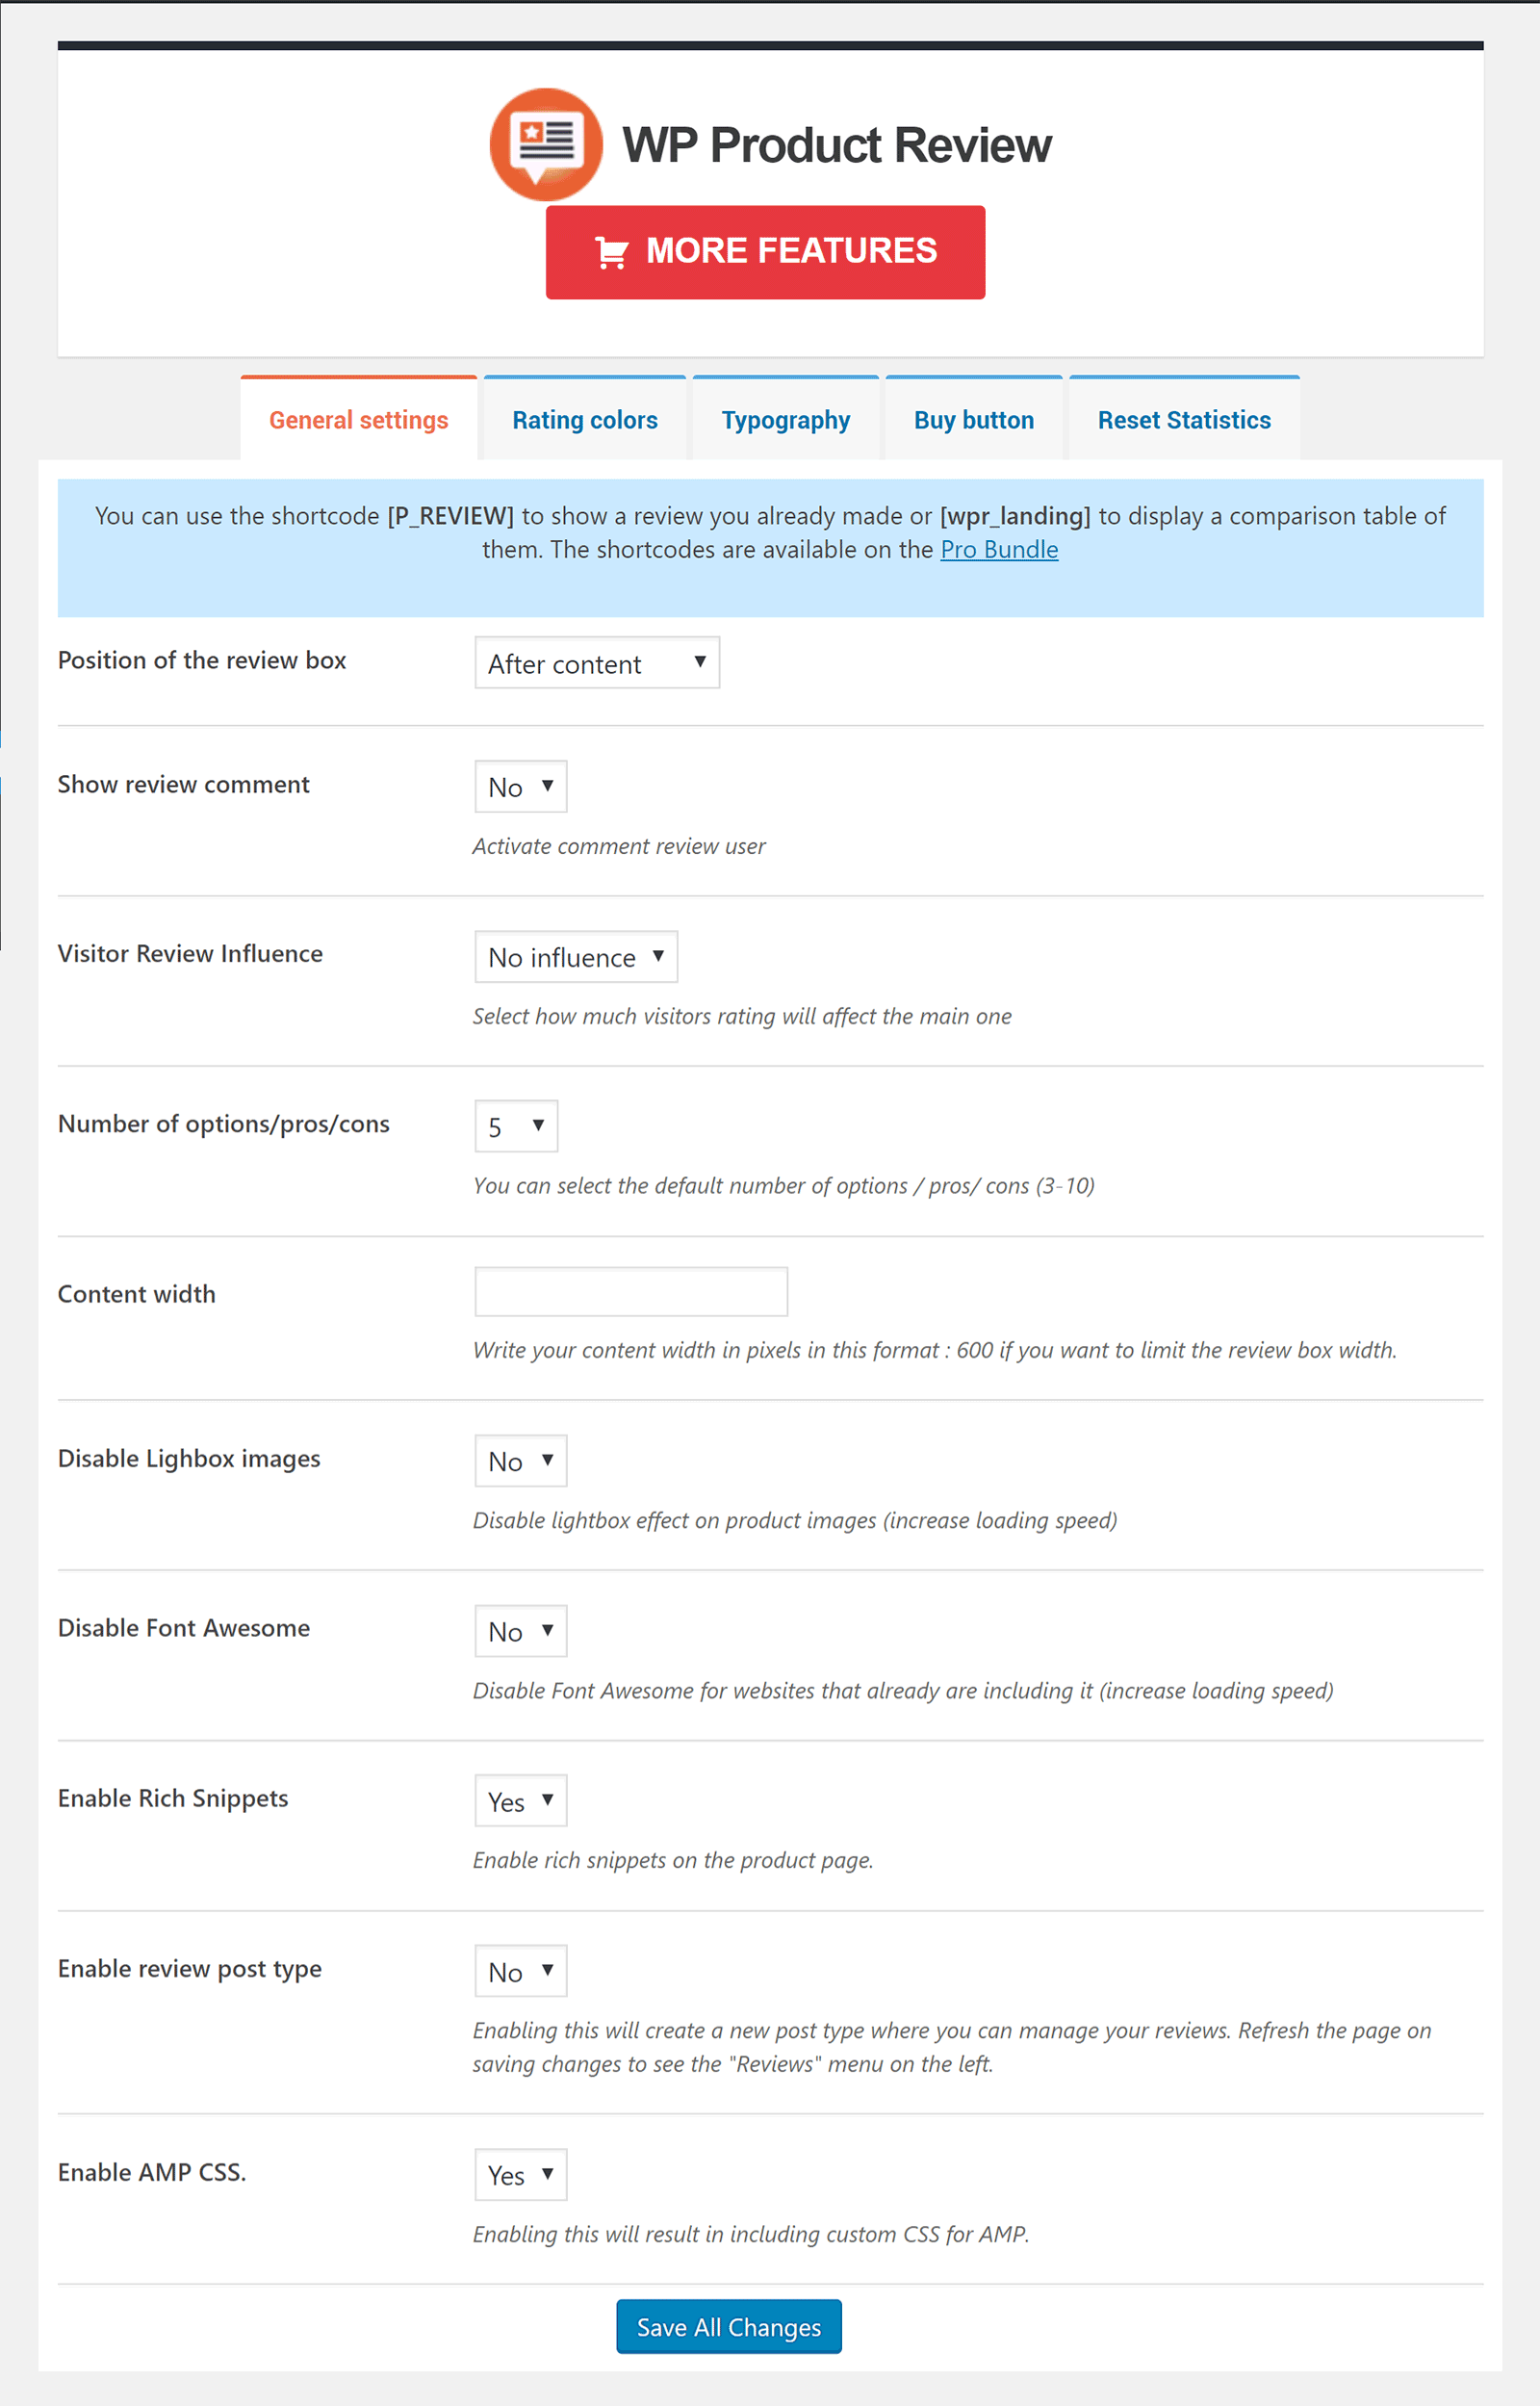 WP Product Review General Settings